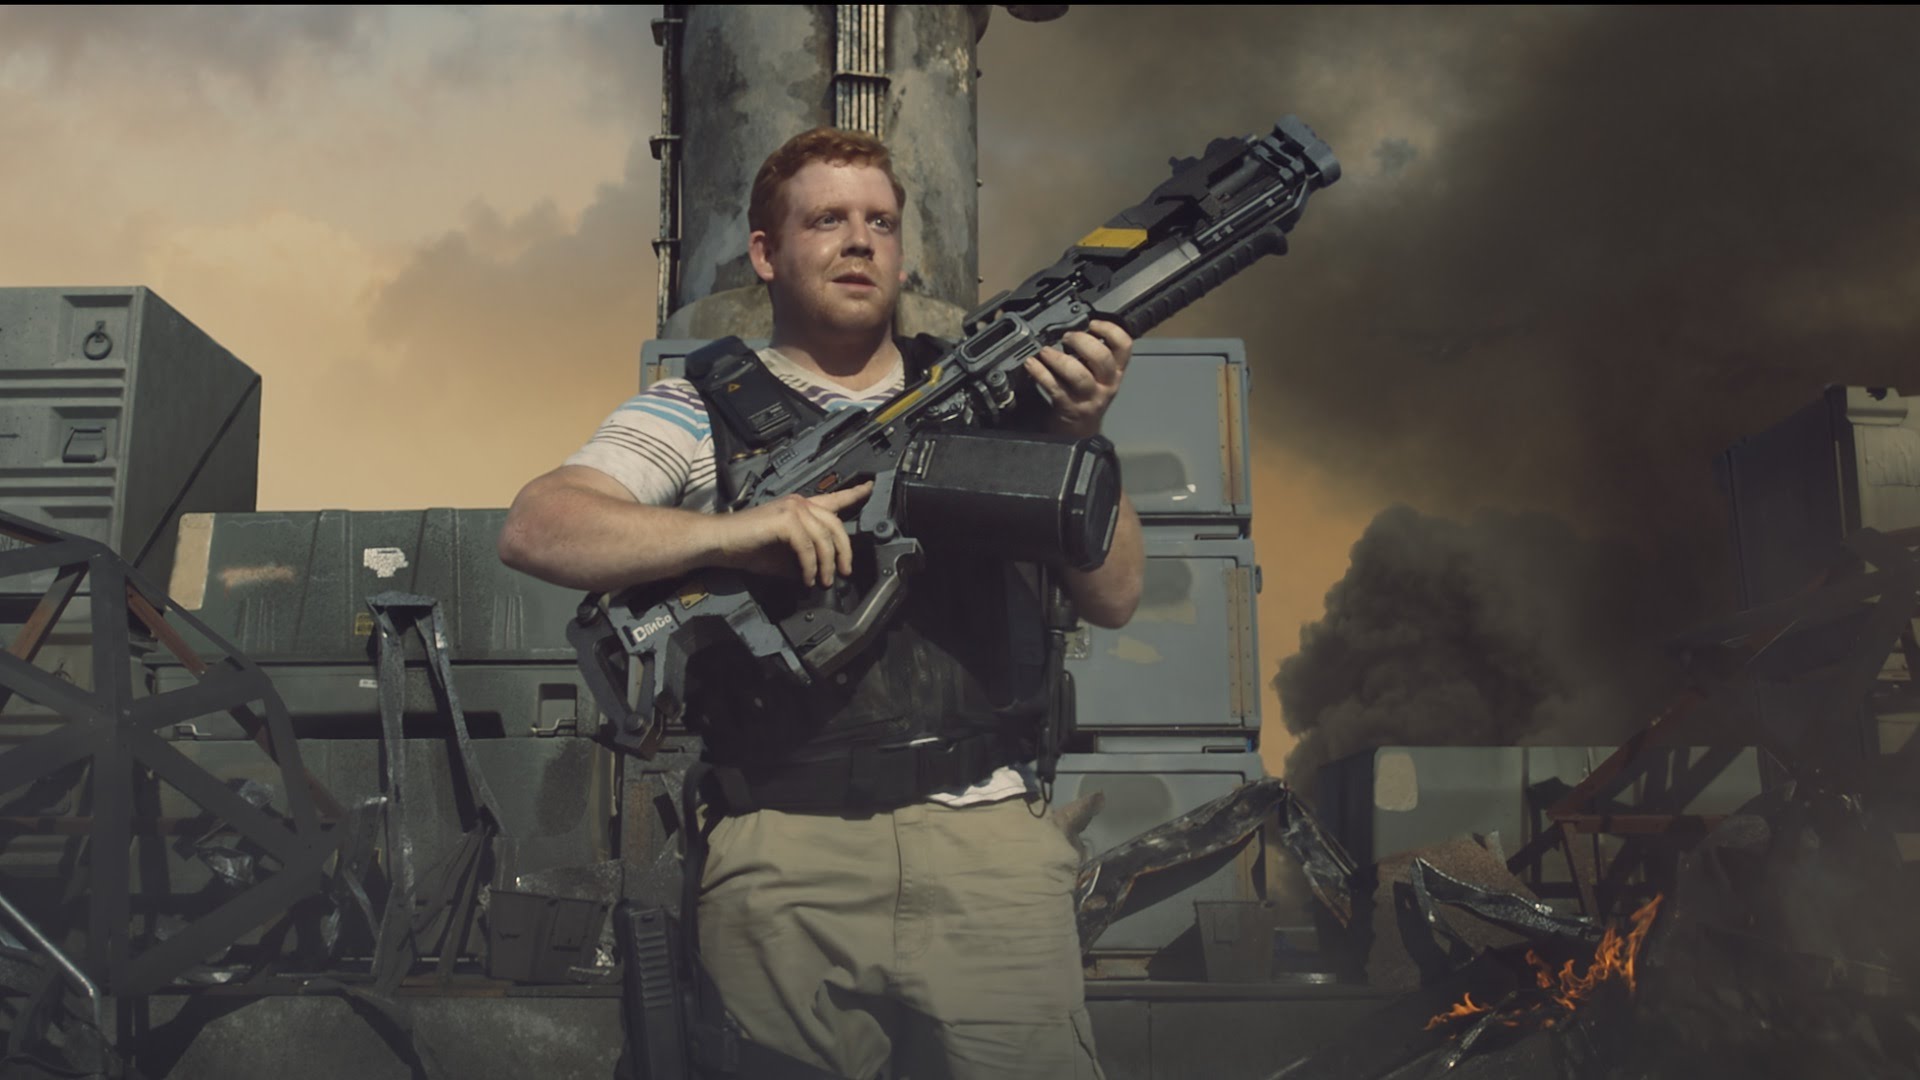 Call of Duty®: Black Ops III Live Action Trailer - “Seize Glory”